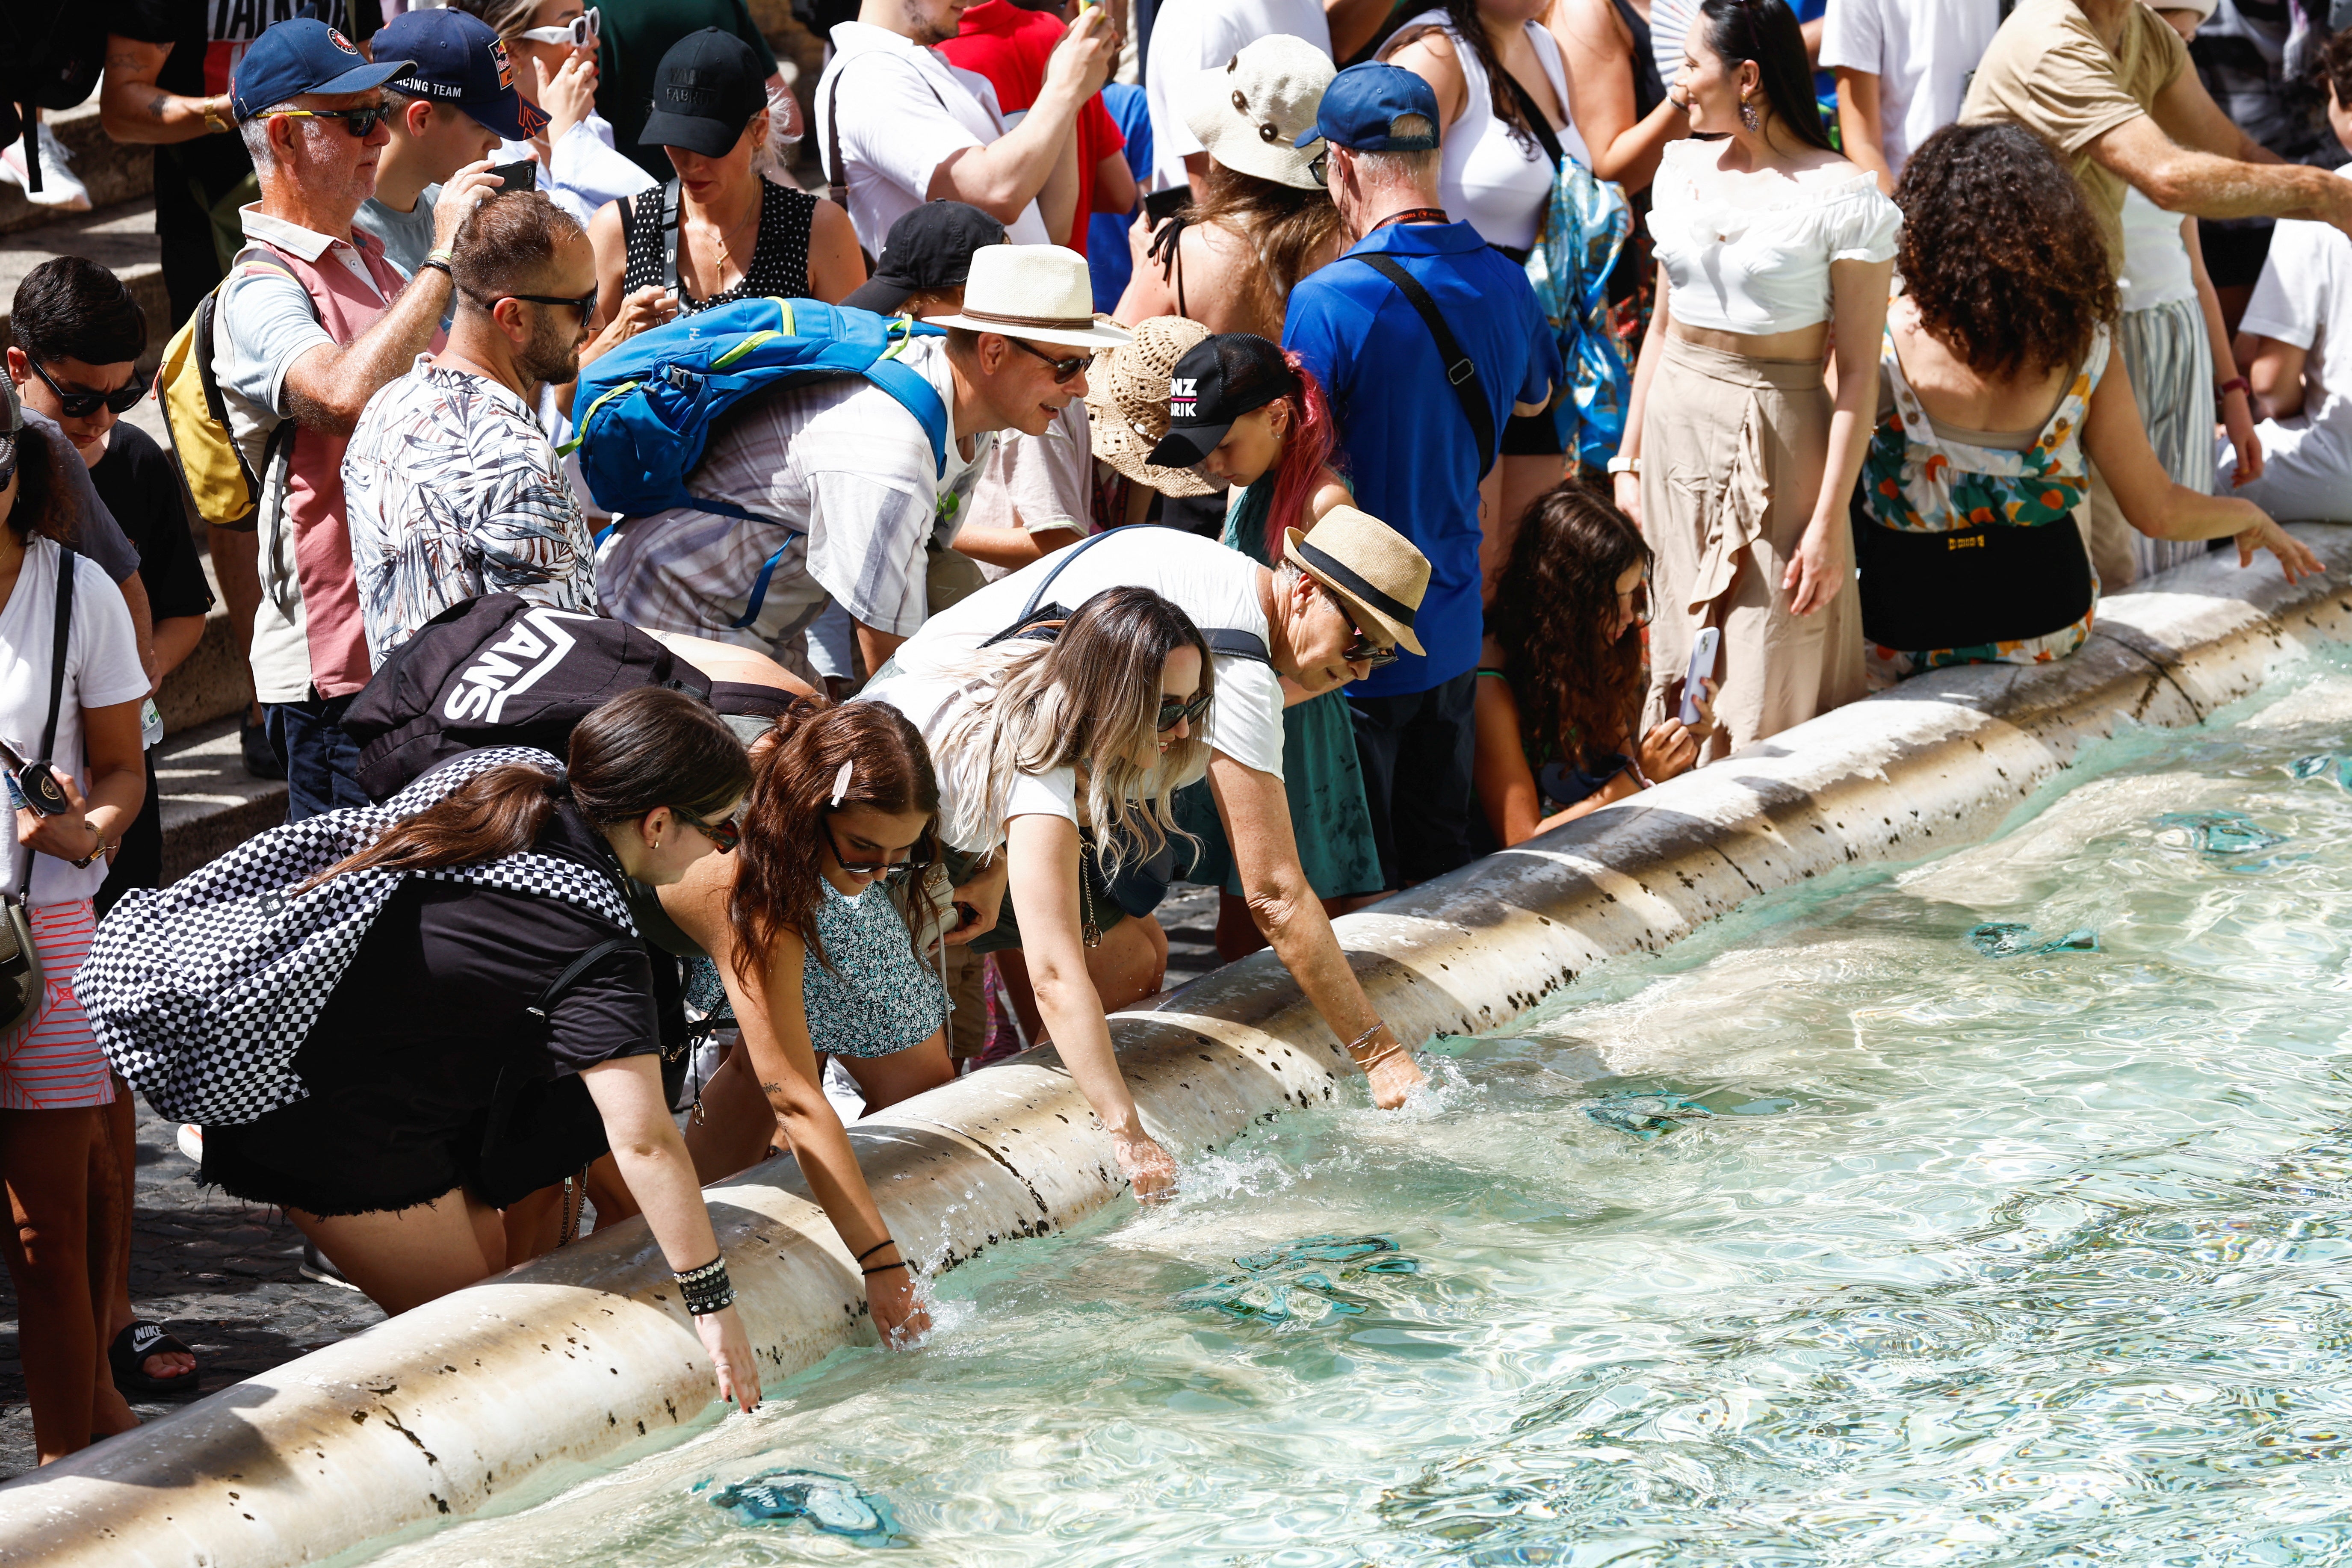 People cool themselves at the Trevi Fountain during a heatwave across Italy